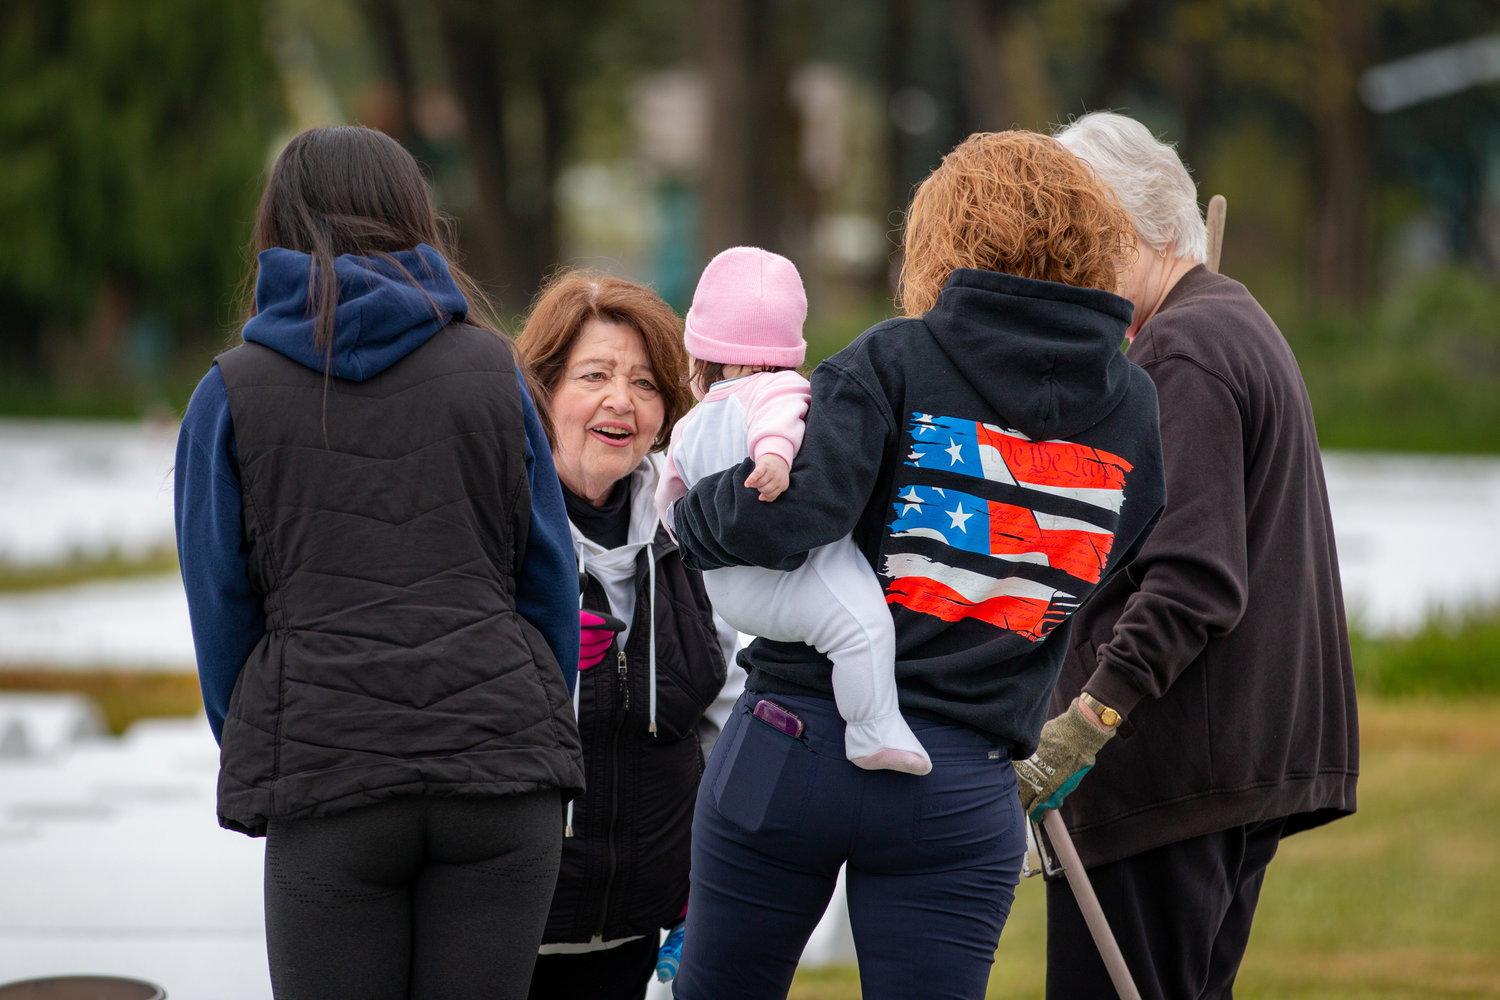 Marveen Rohr, the spokesperson for the Greenwood Memorial Park, greets a young child as additional members arrive for the work party to help restore the cemetery.